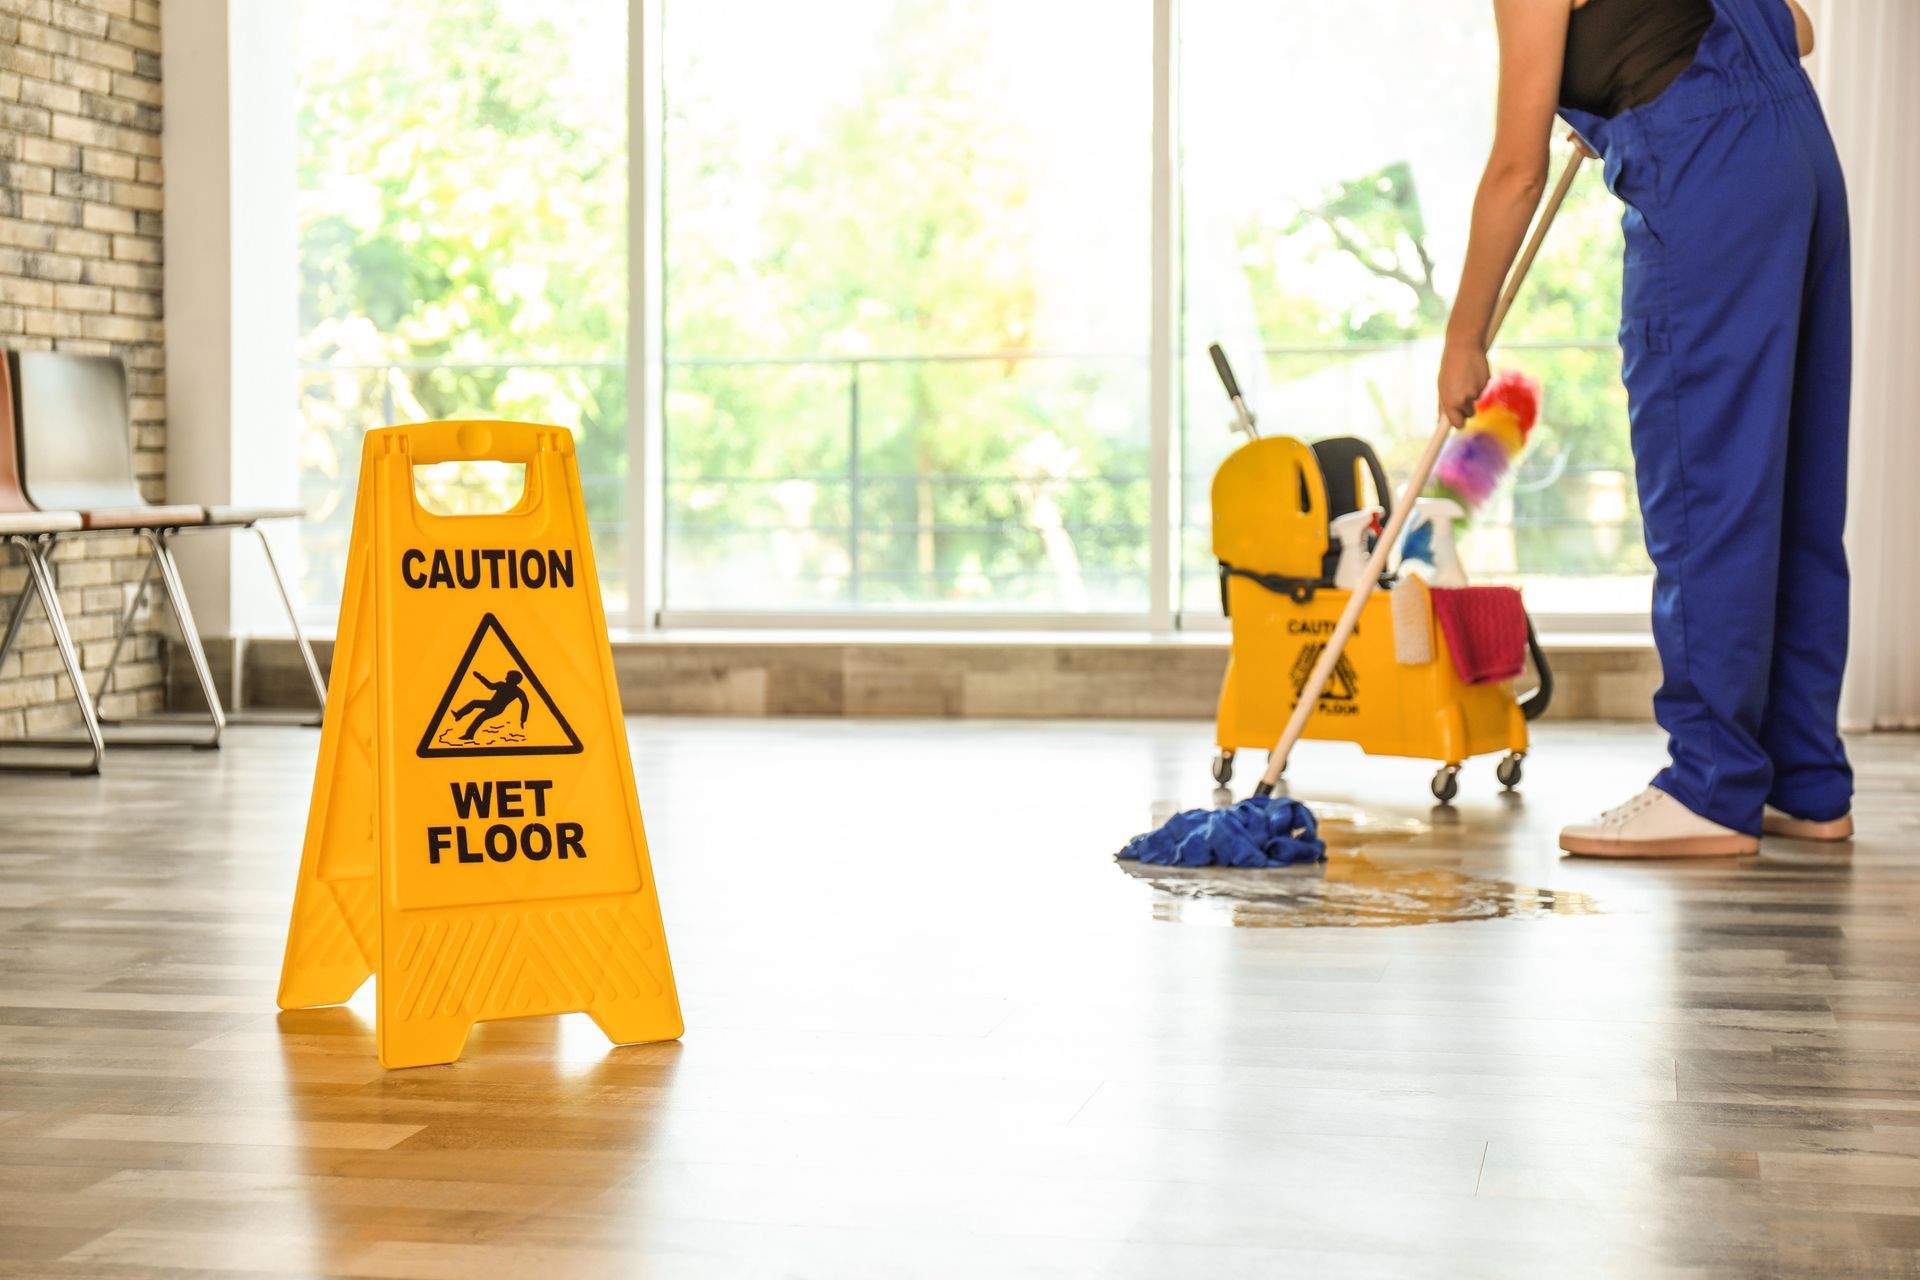 a man is cleaning the floor in an office with a wet floor sign in the background .